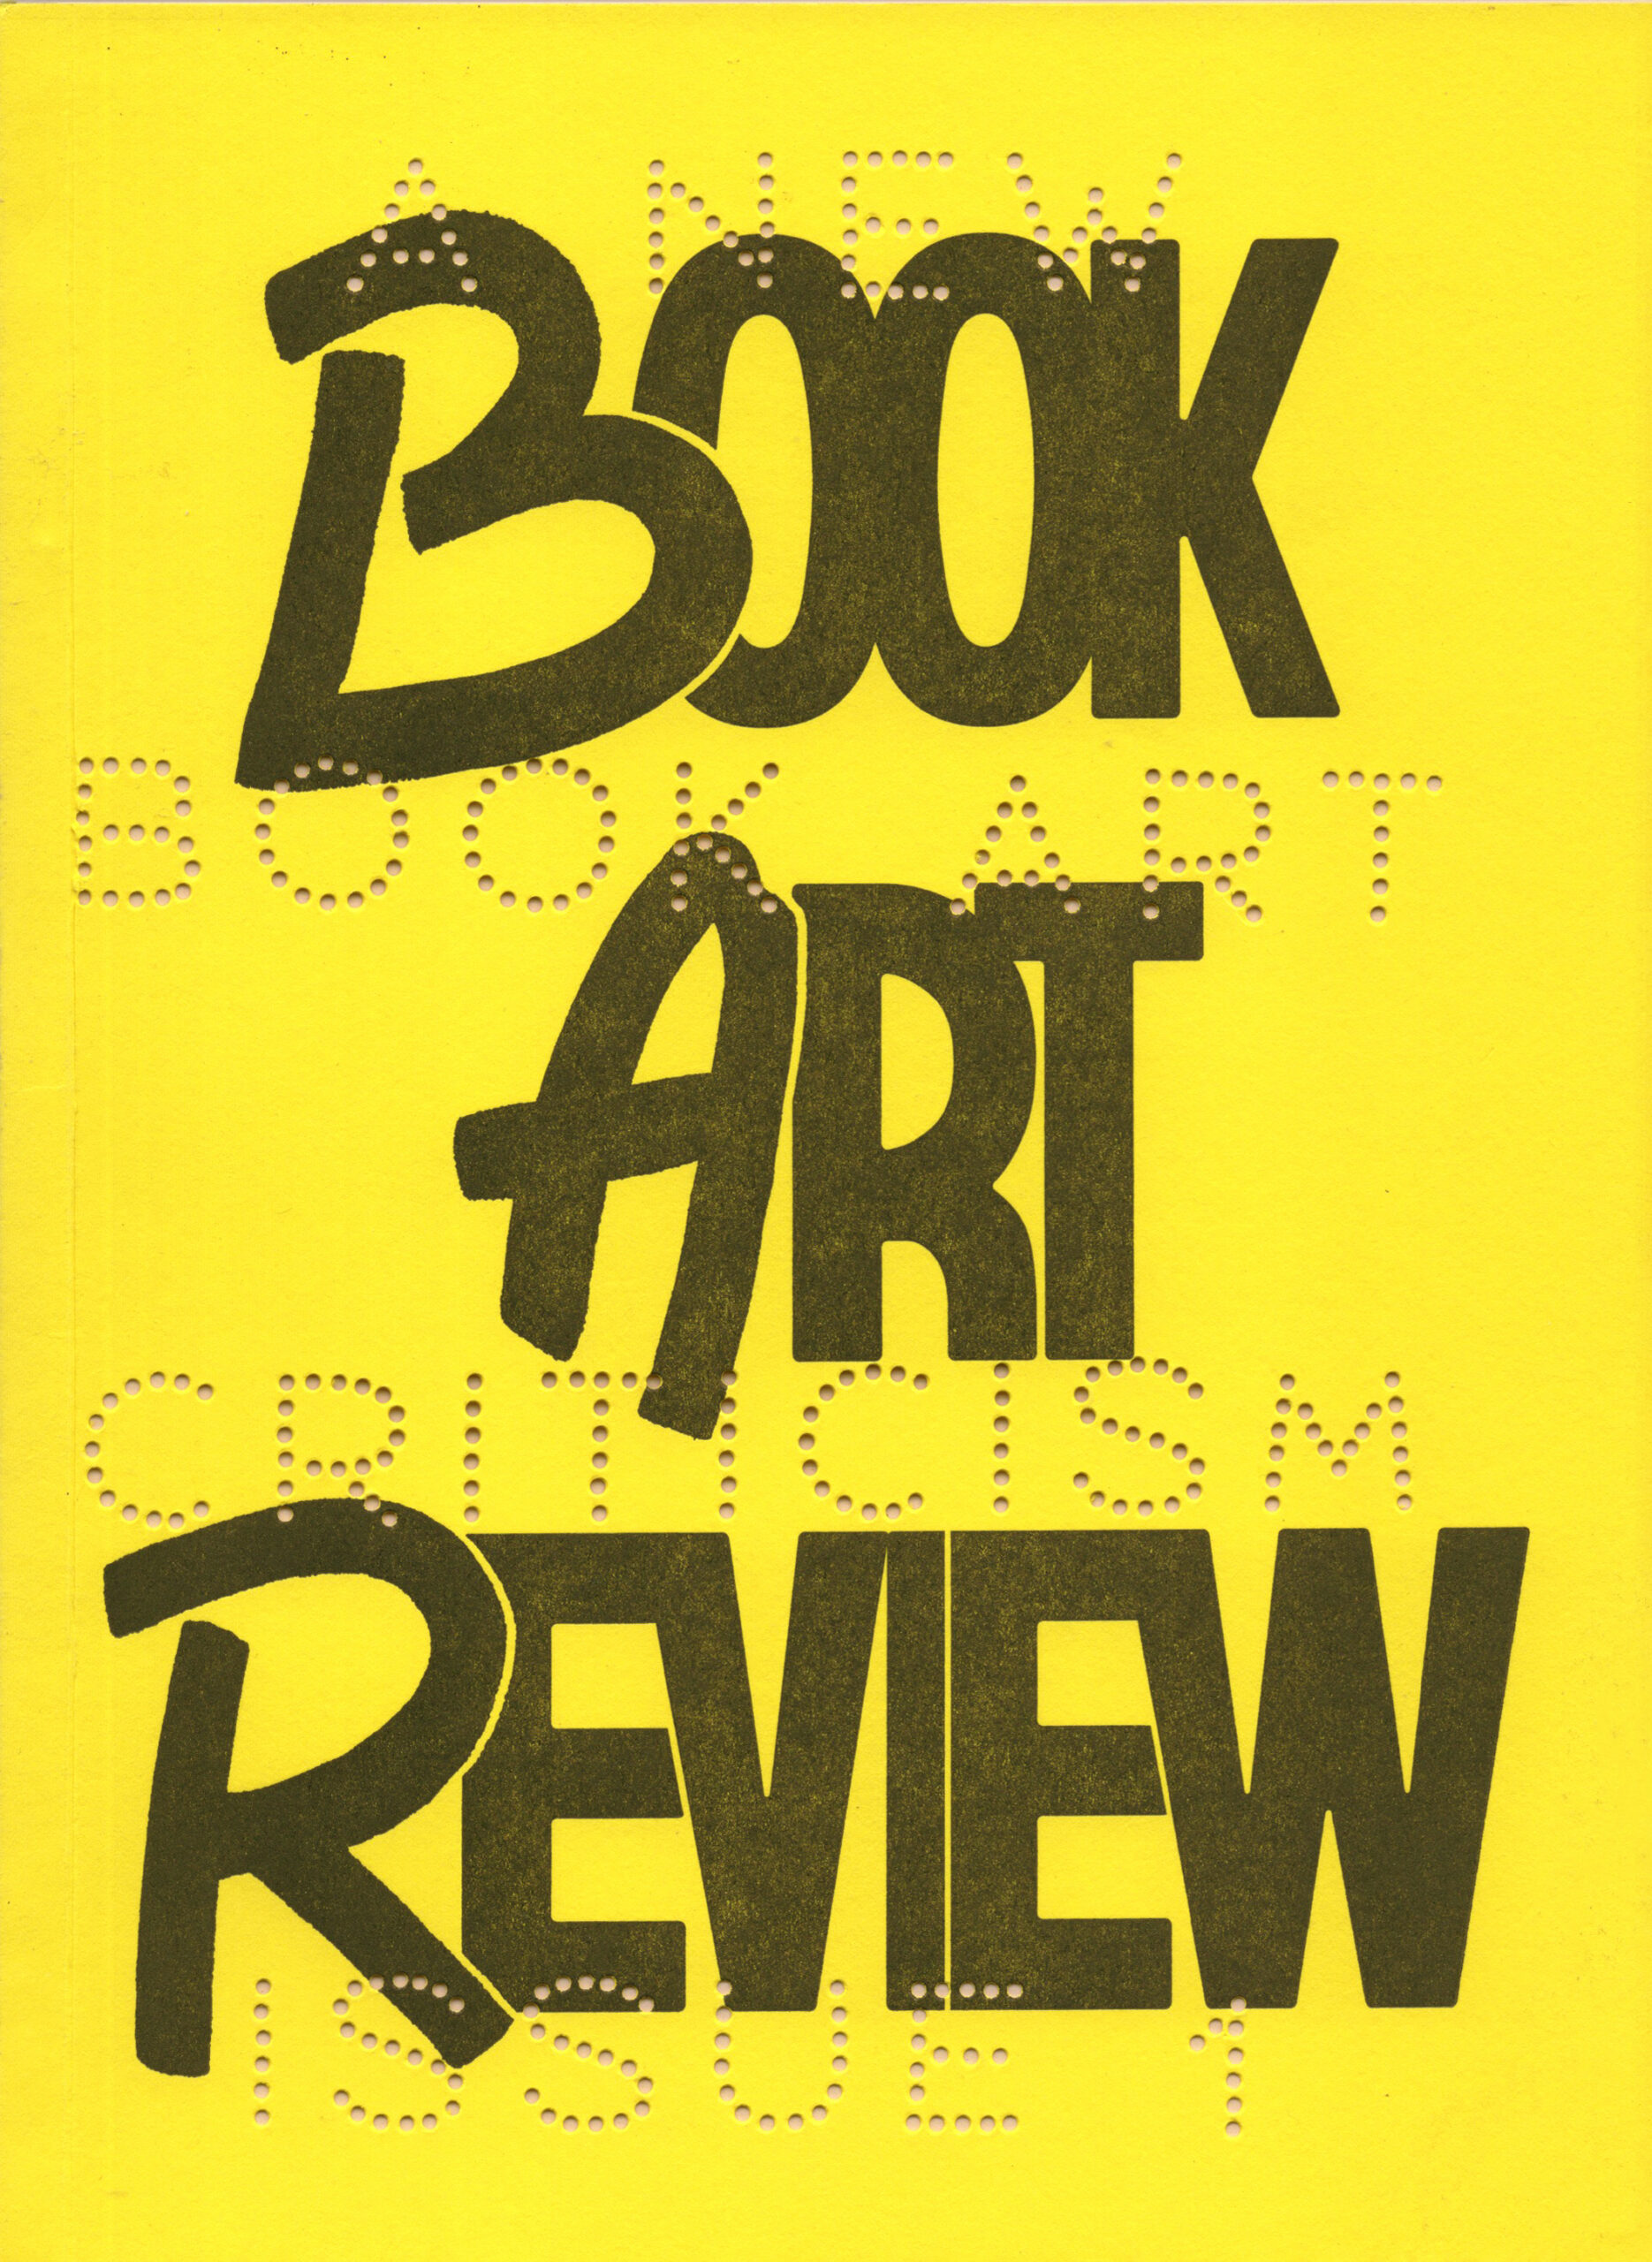 Yellow book cover with rough paper and the words "A New Book Art Criticism" die cut out of the cover with small dots